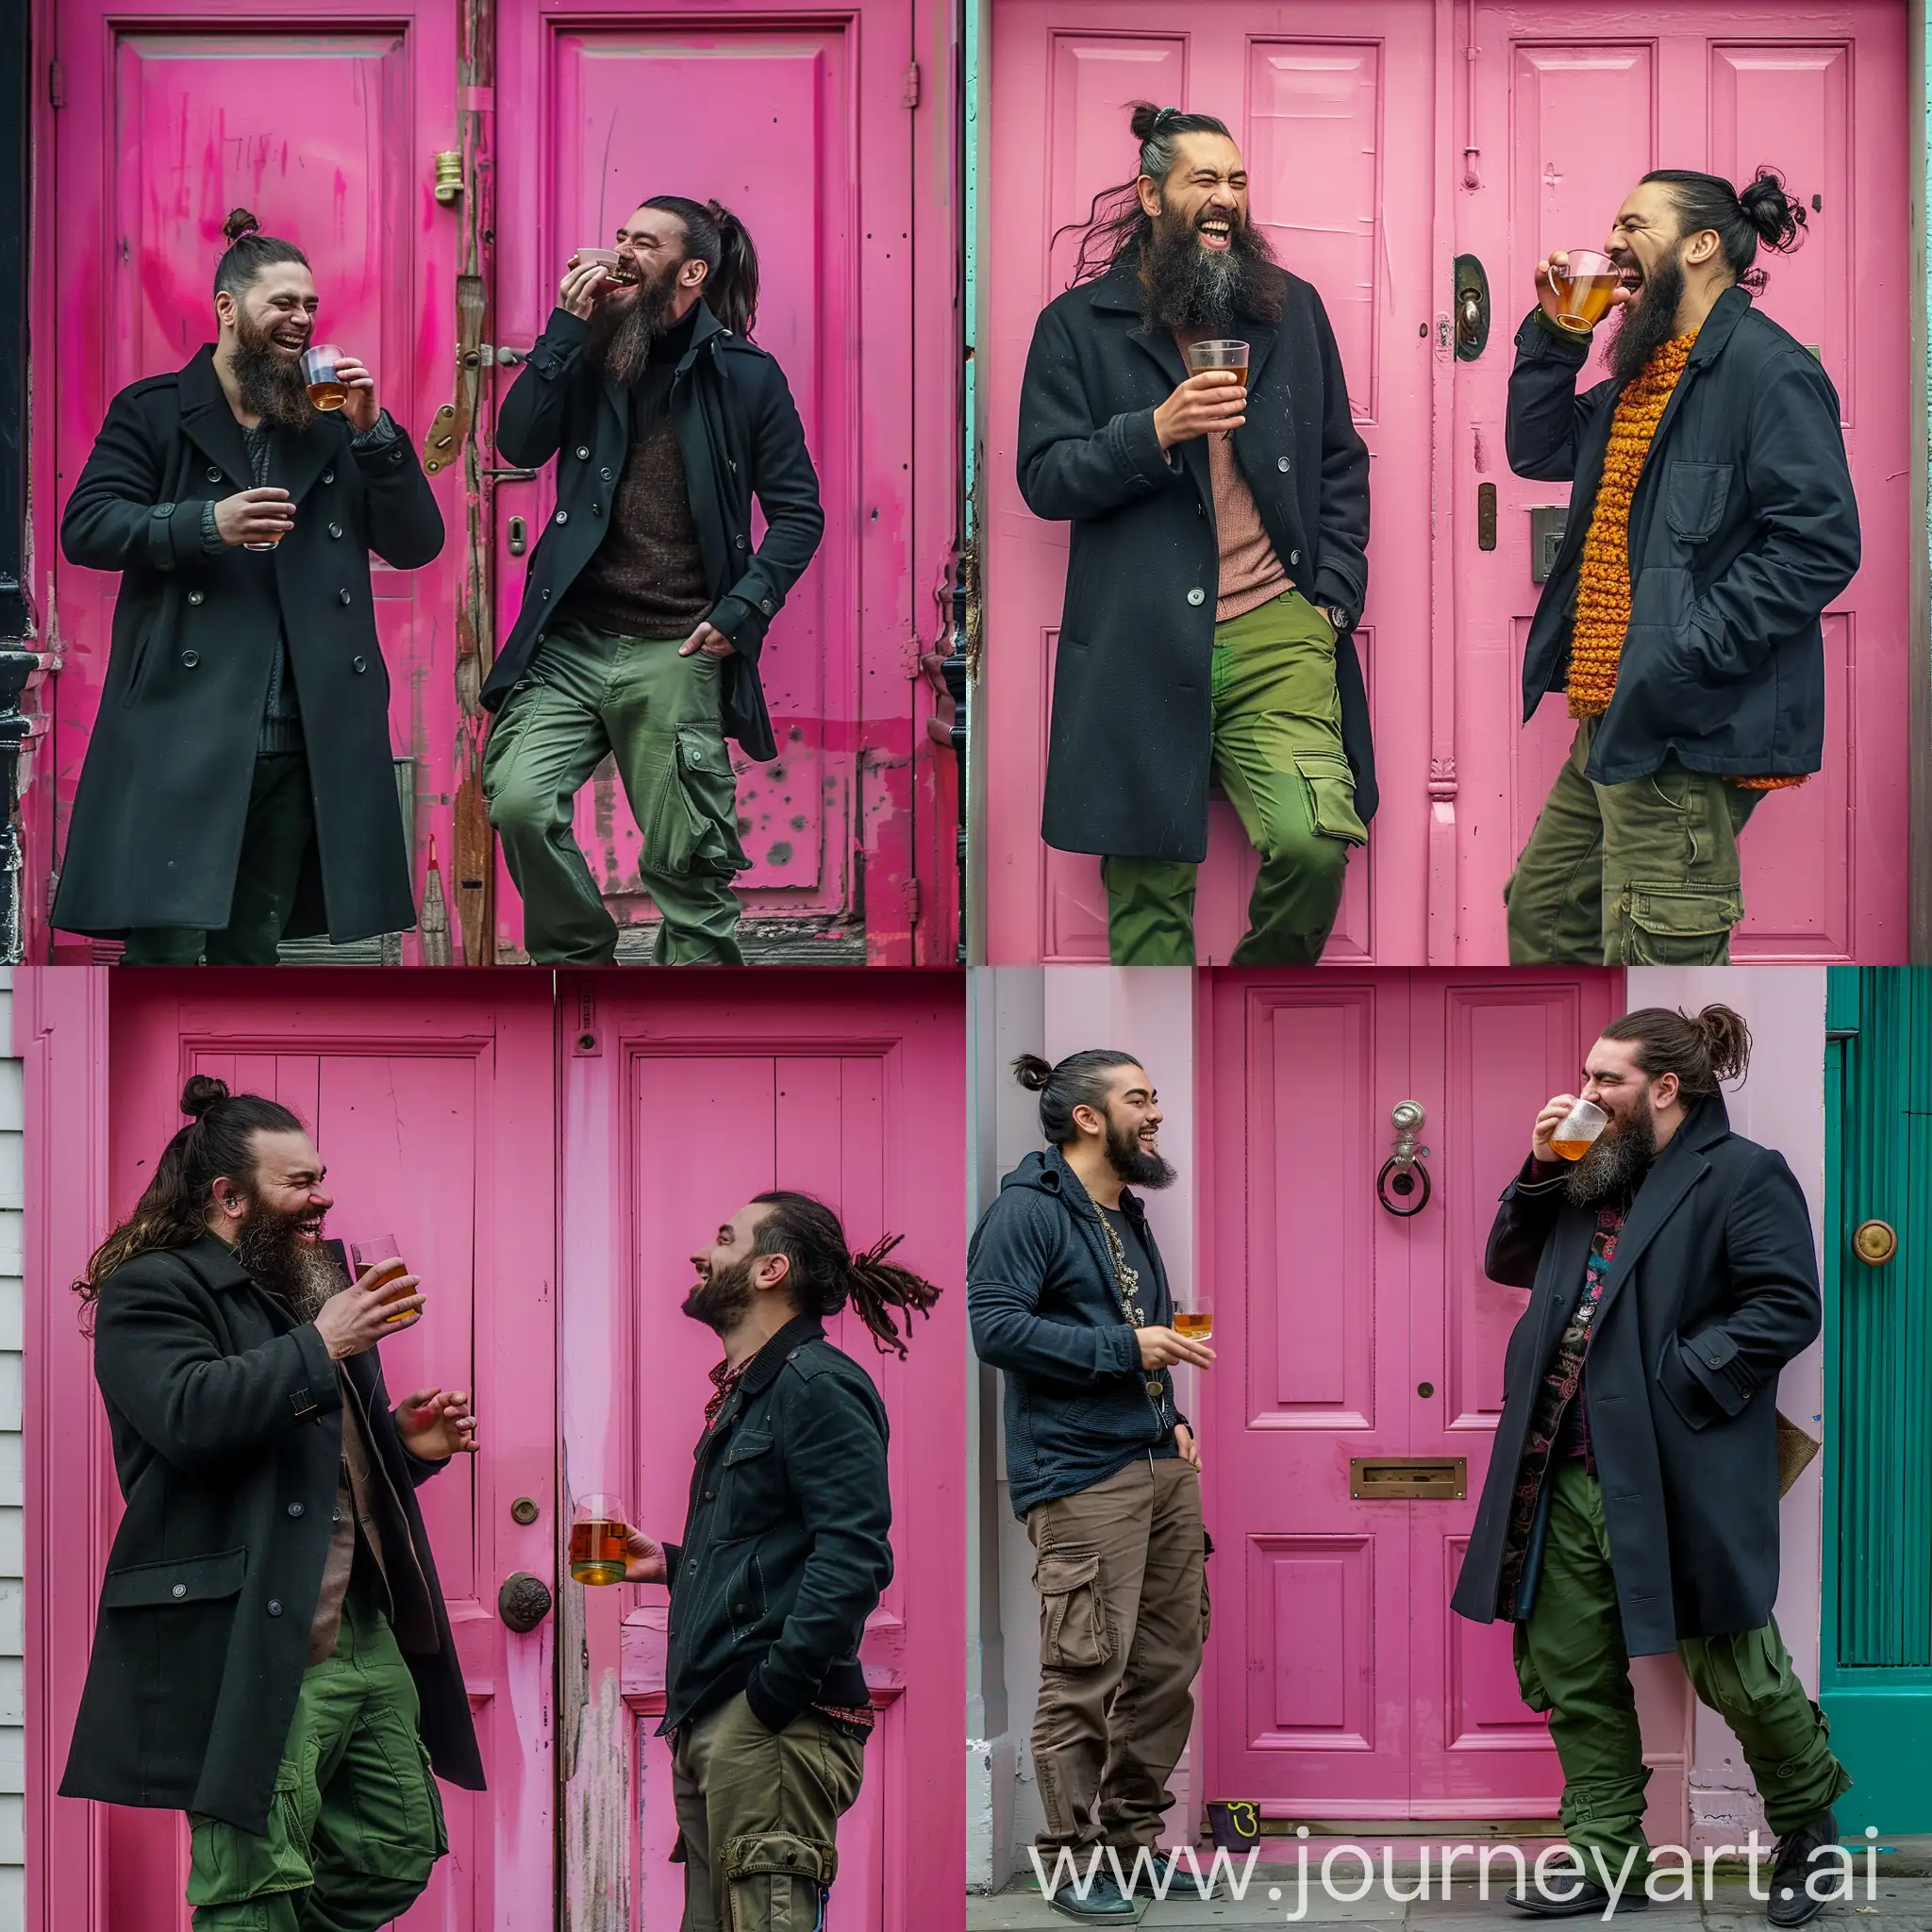 A man in a dark coat and green cargo pants with a long beard and ponytail is drinking tea in front of a pink door and a man is laughing next to him.